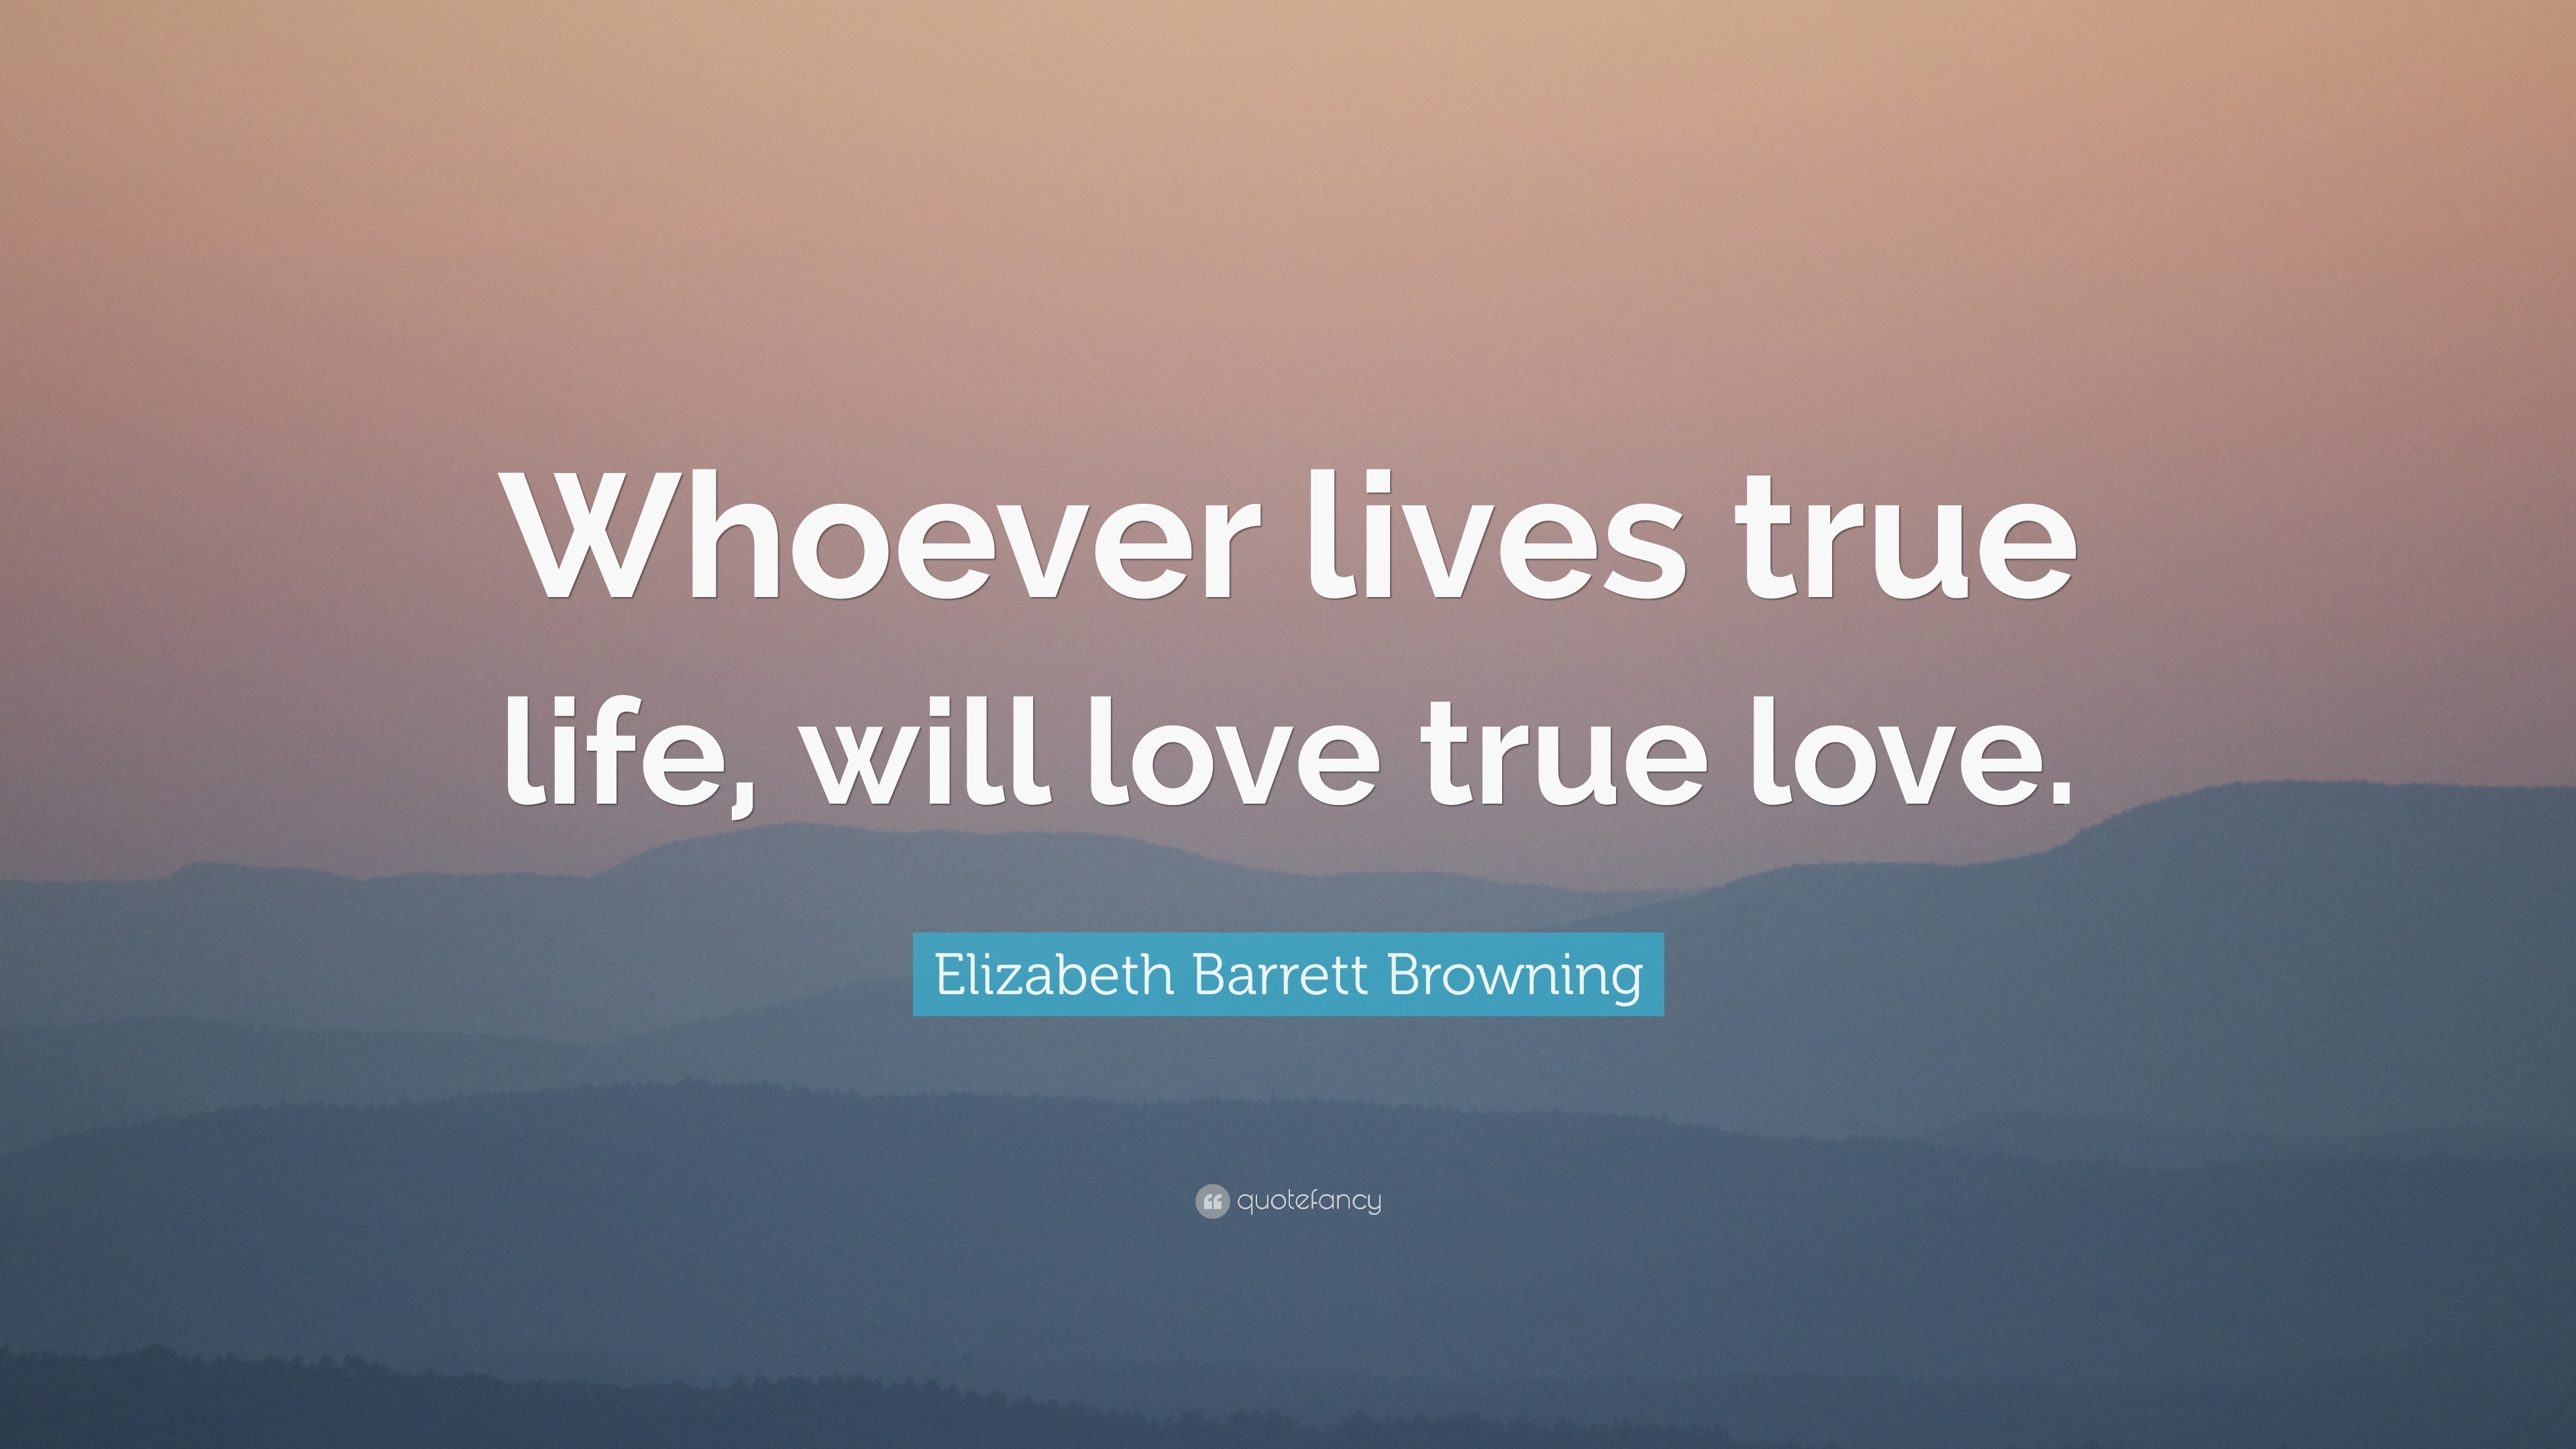 Elizabeth Barrett Browning Quote “Whoever lives true life will love true love